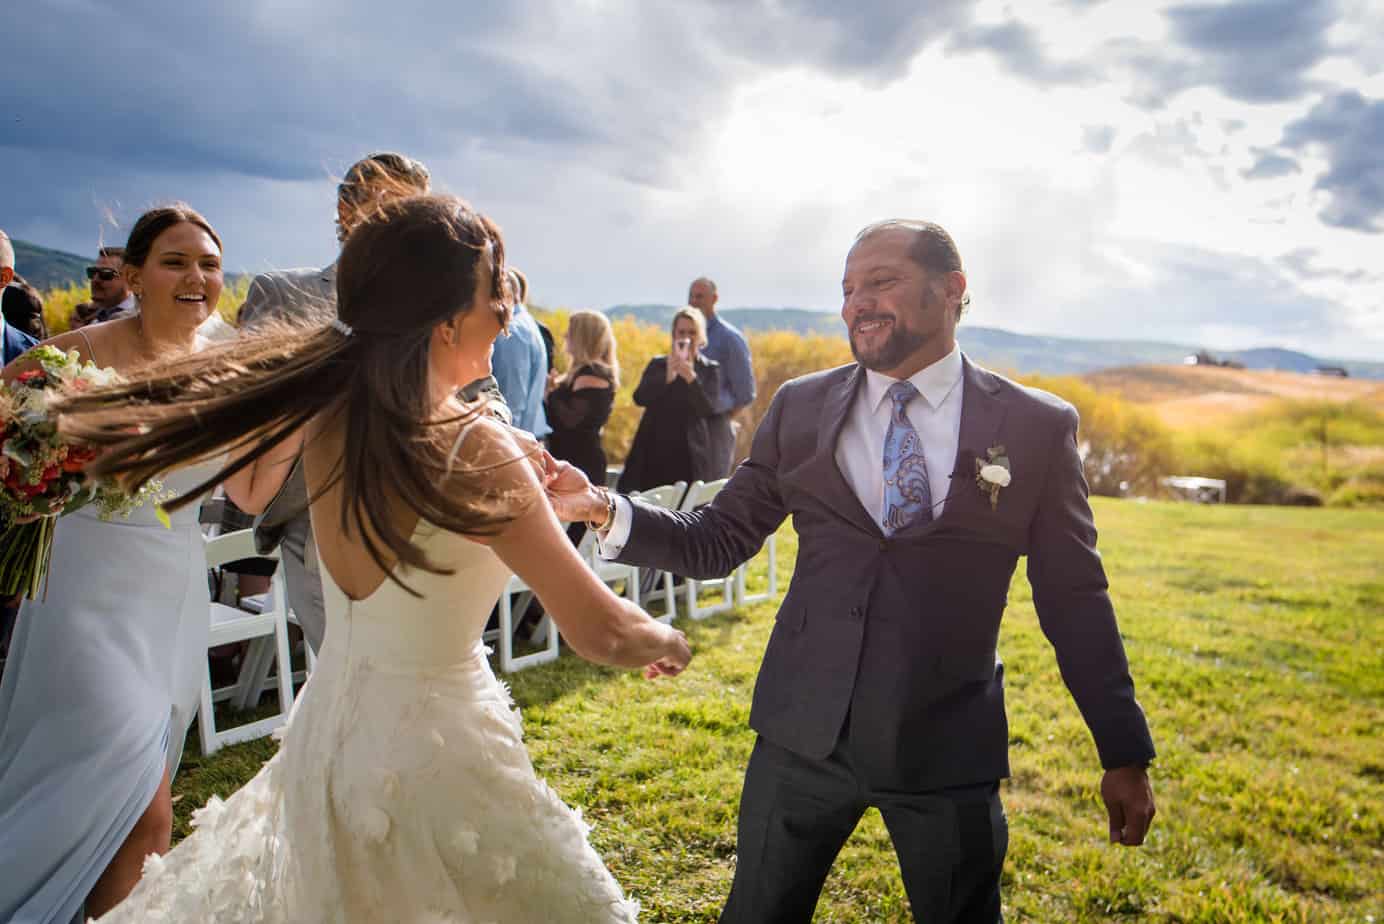 The couple dances down their ceremony recessional celebrating having just exchanged vows at this Steamboat Springs Wedding